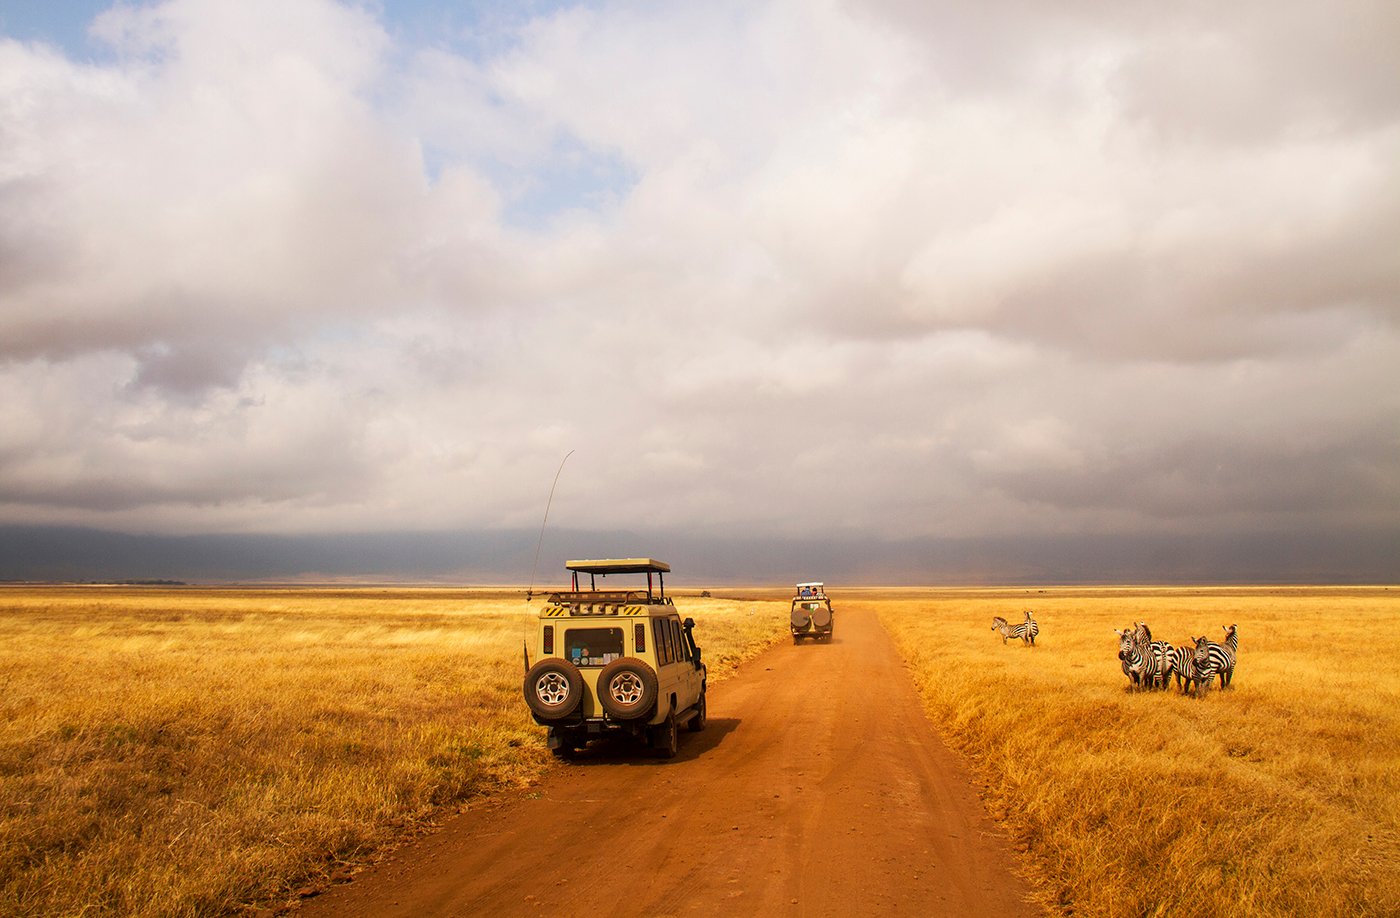 Things to do on a Safari